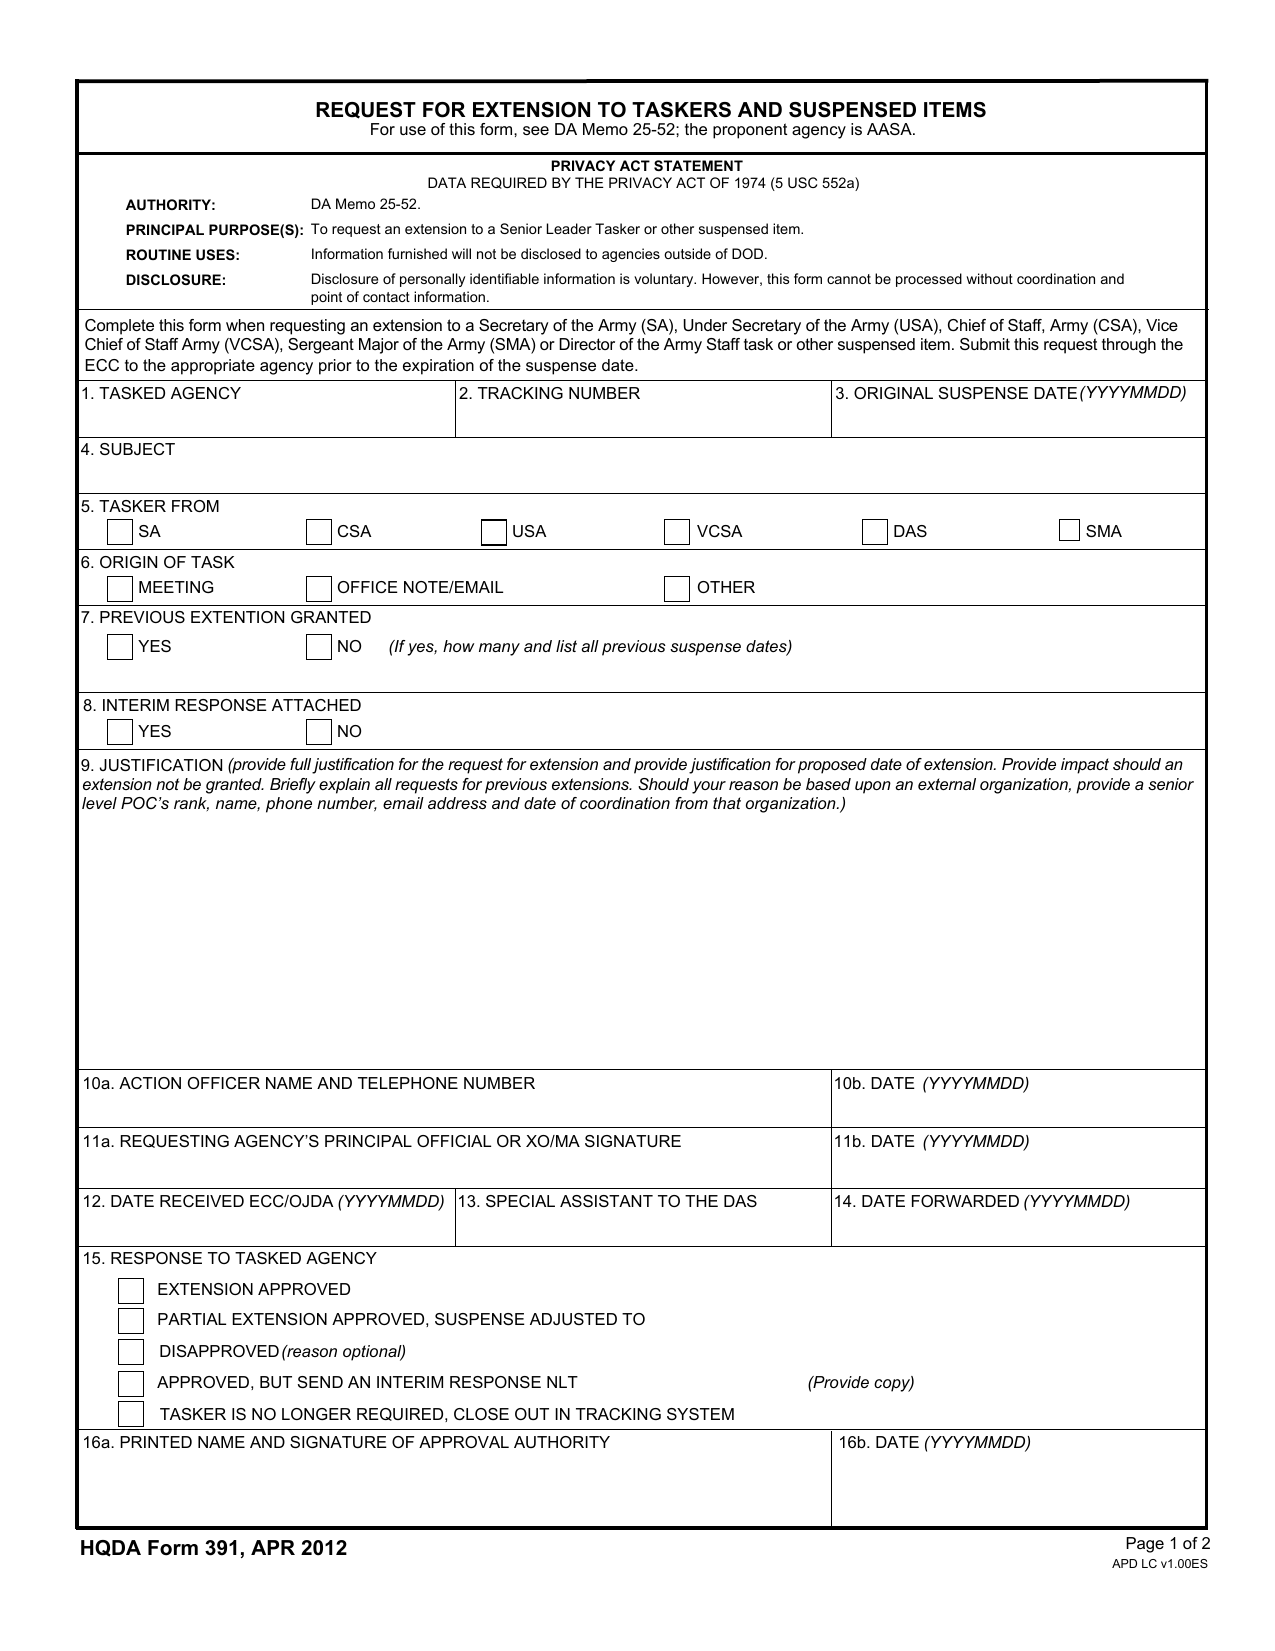 Download Form HQDA391 | Request For Extension To Taskers And Suspensed Items | PDF | FreeDownloads.net